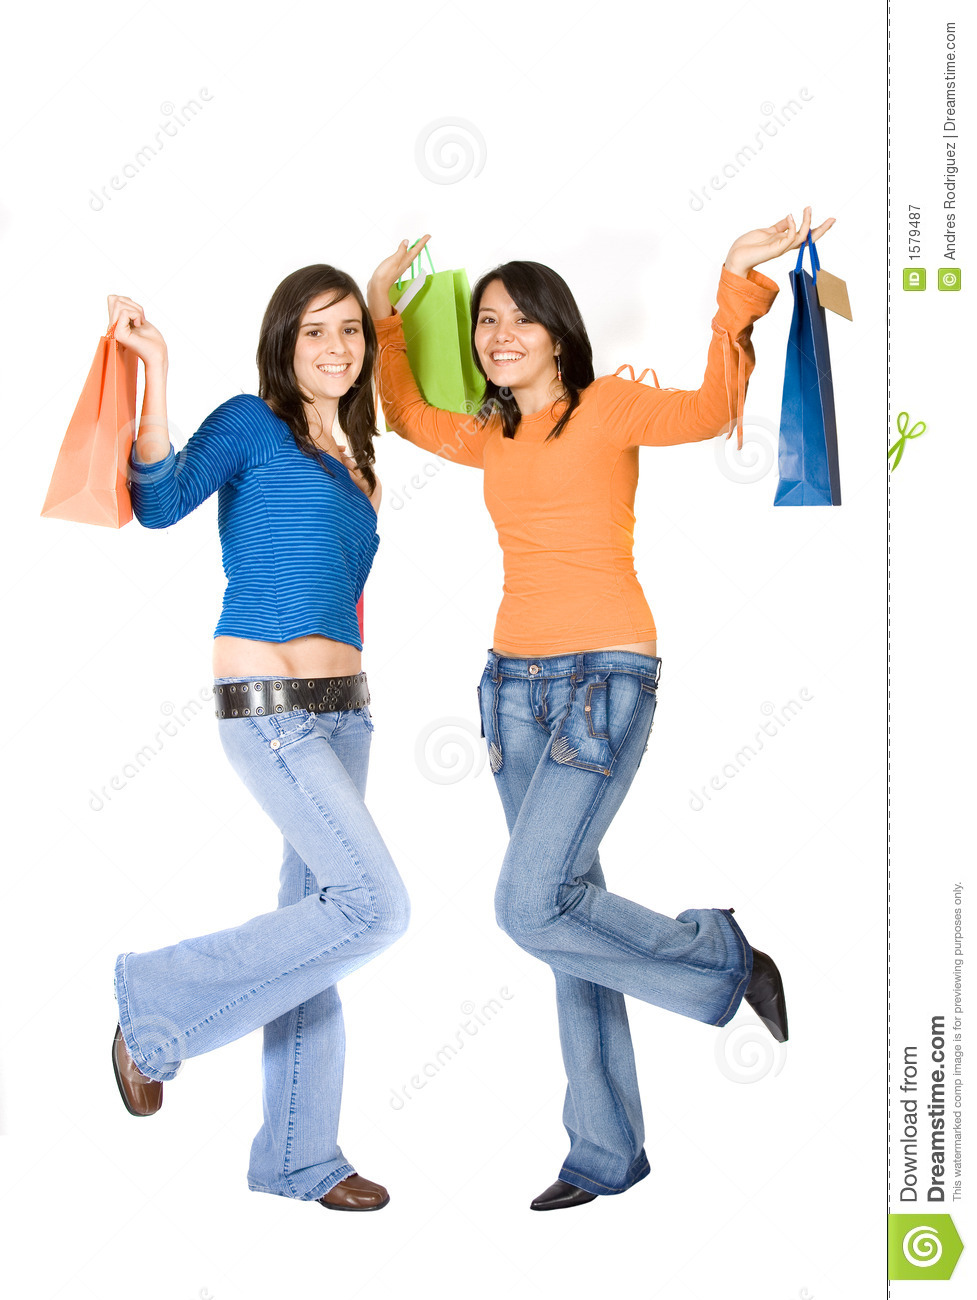 Girls Having Fun On A Shopping Day Out Royalty Free Stock Photography    